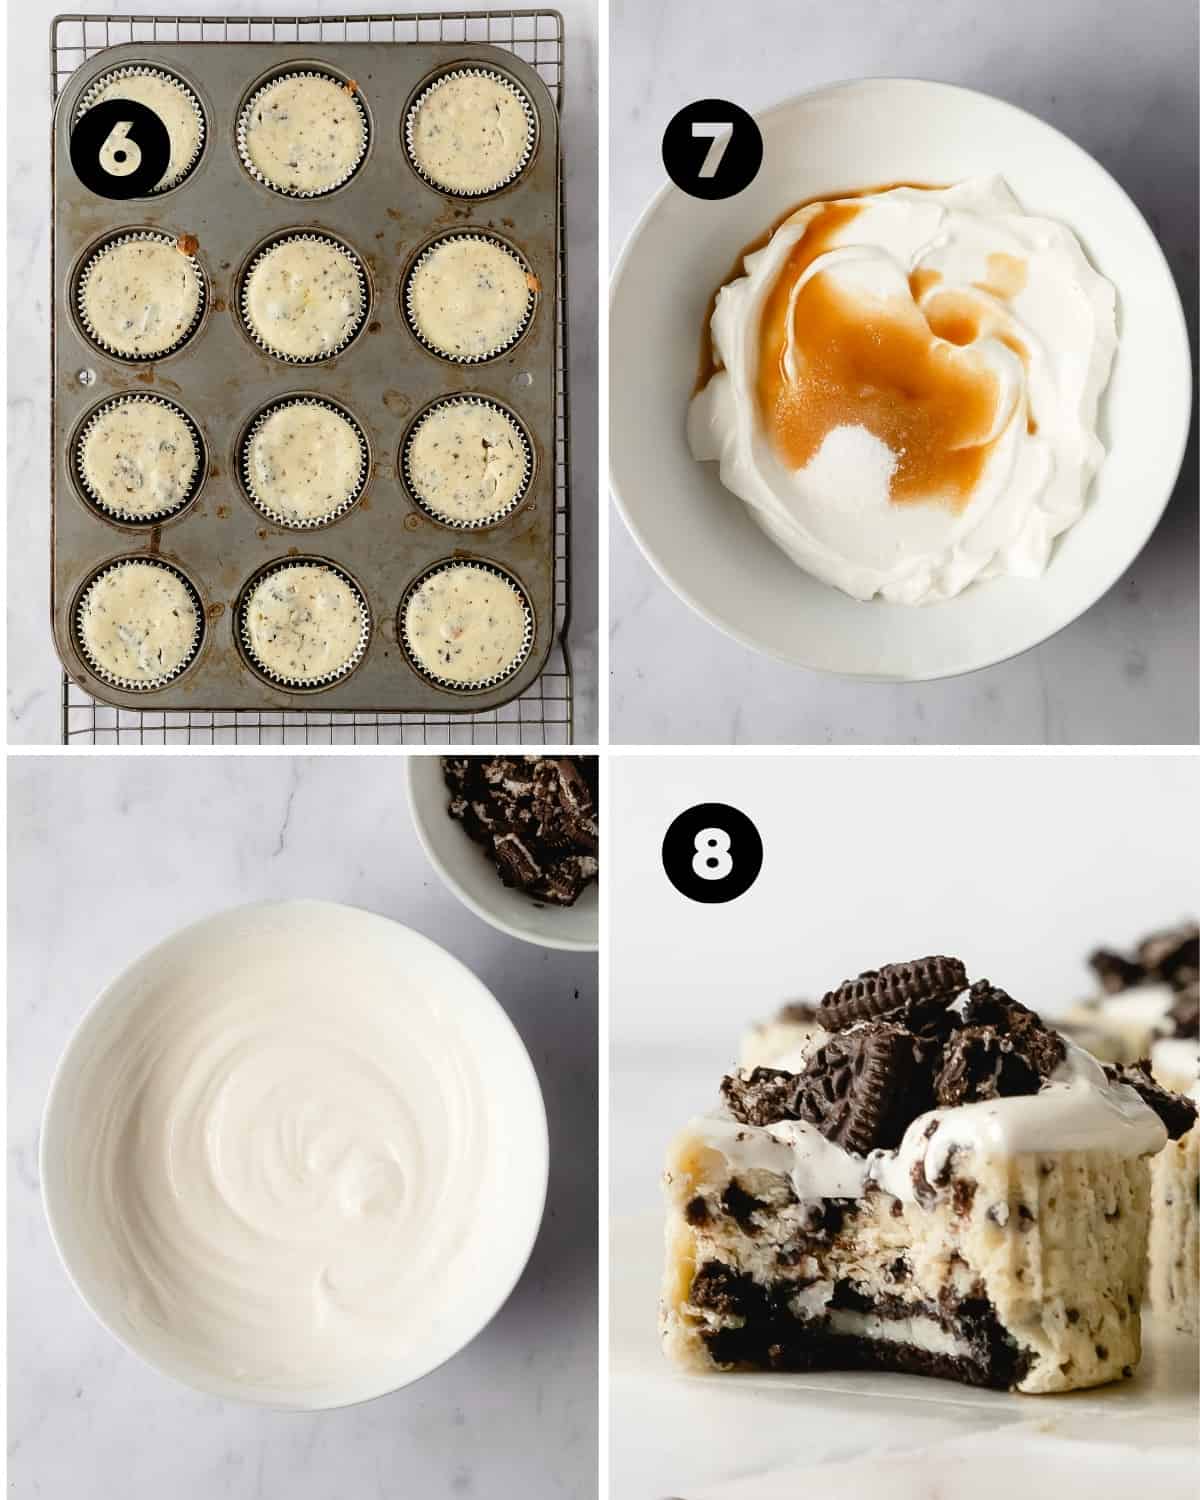 Bake the cheesecakes for 14-16 minutes. Make the topping by mixing the sour cream, sugar and vanilla extract together until smooth and well combined. Top each cooled mini cheesecake with sour cream and more crushed oreo cookies. 